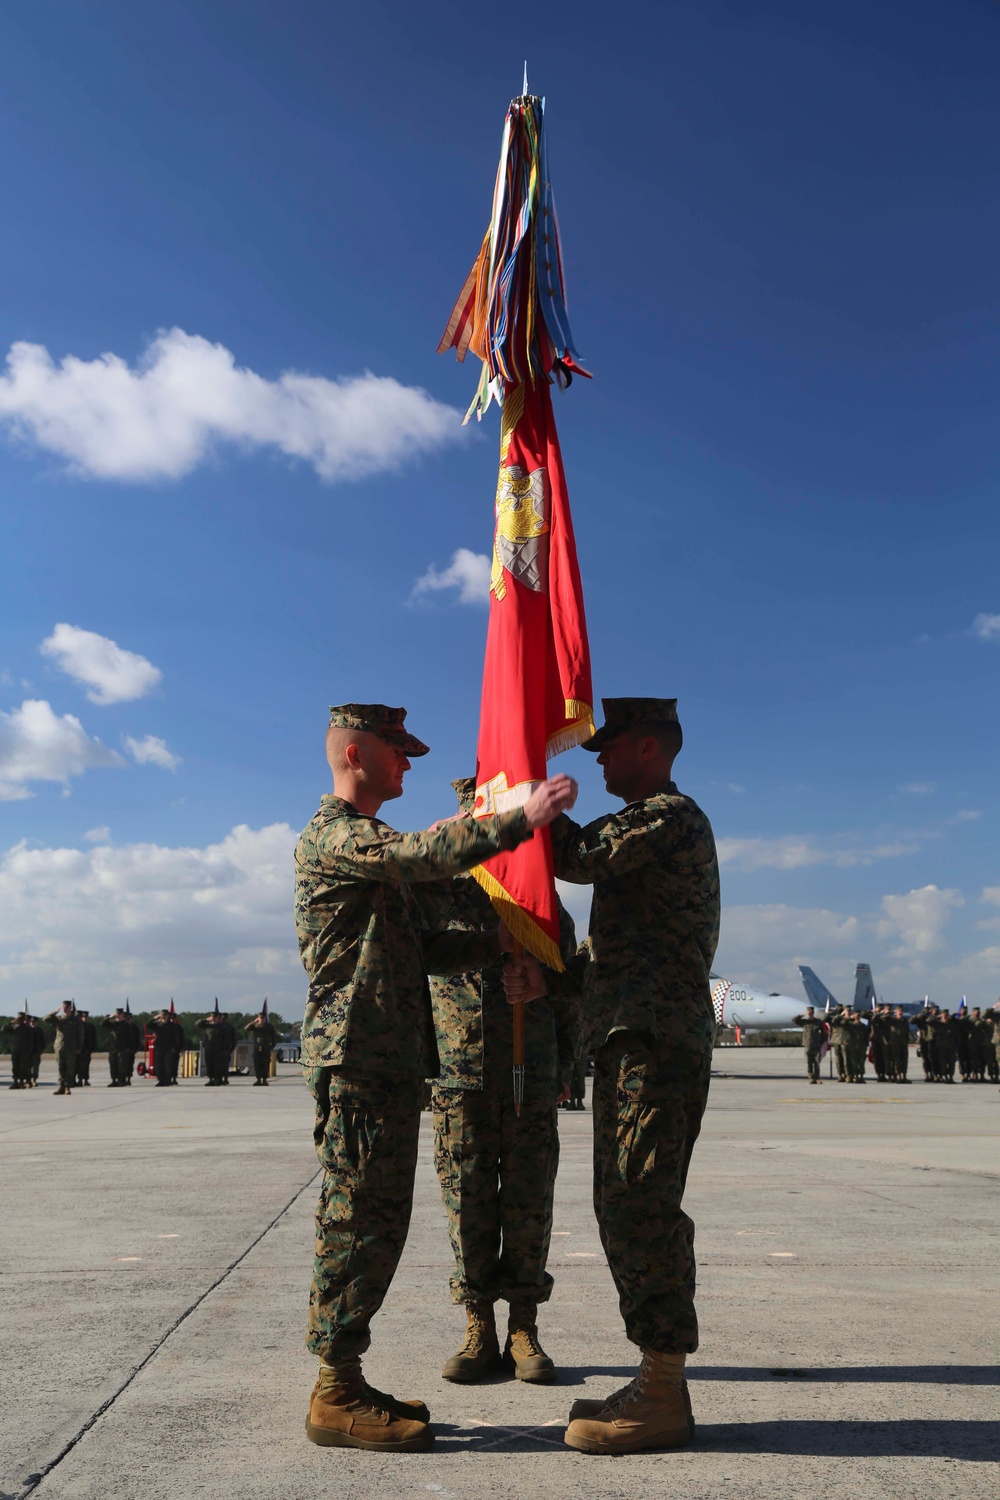 LtCol H. F. Thomas Change of Command